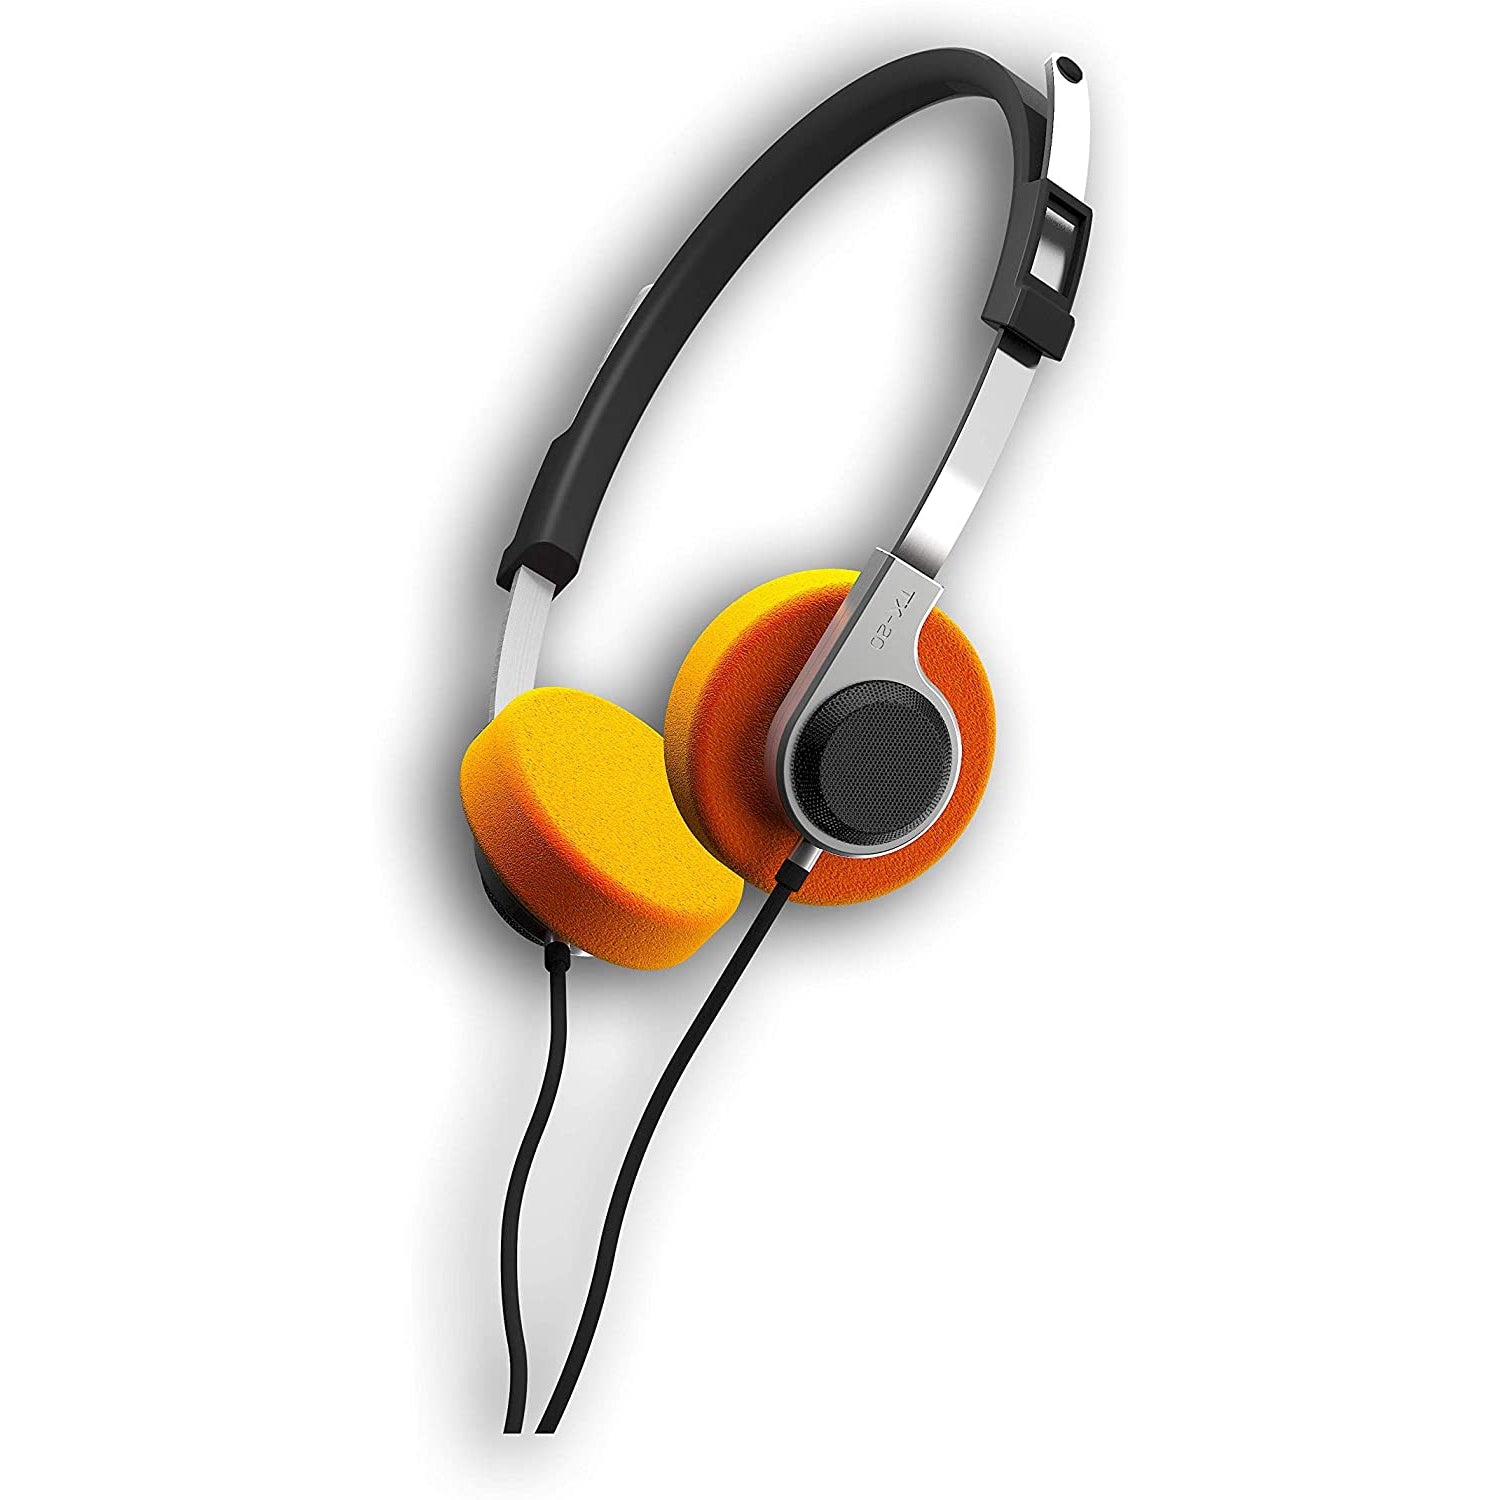 Giotech TX20 Retro Headset in Silver and Orange